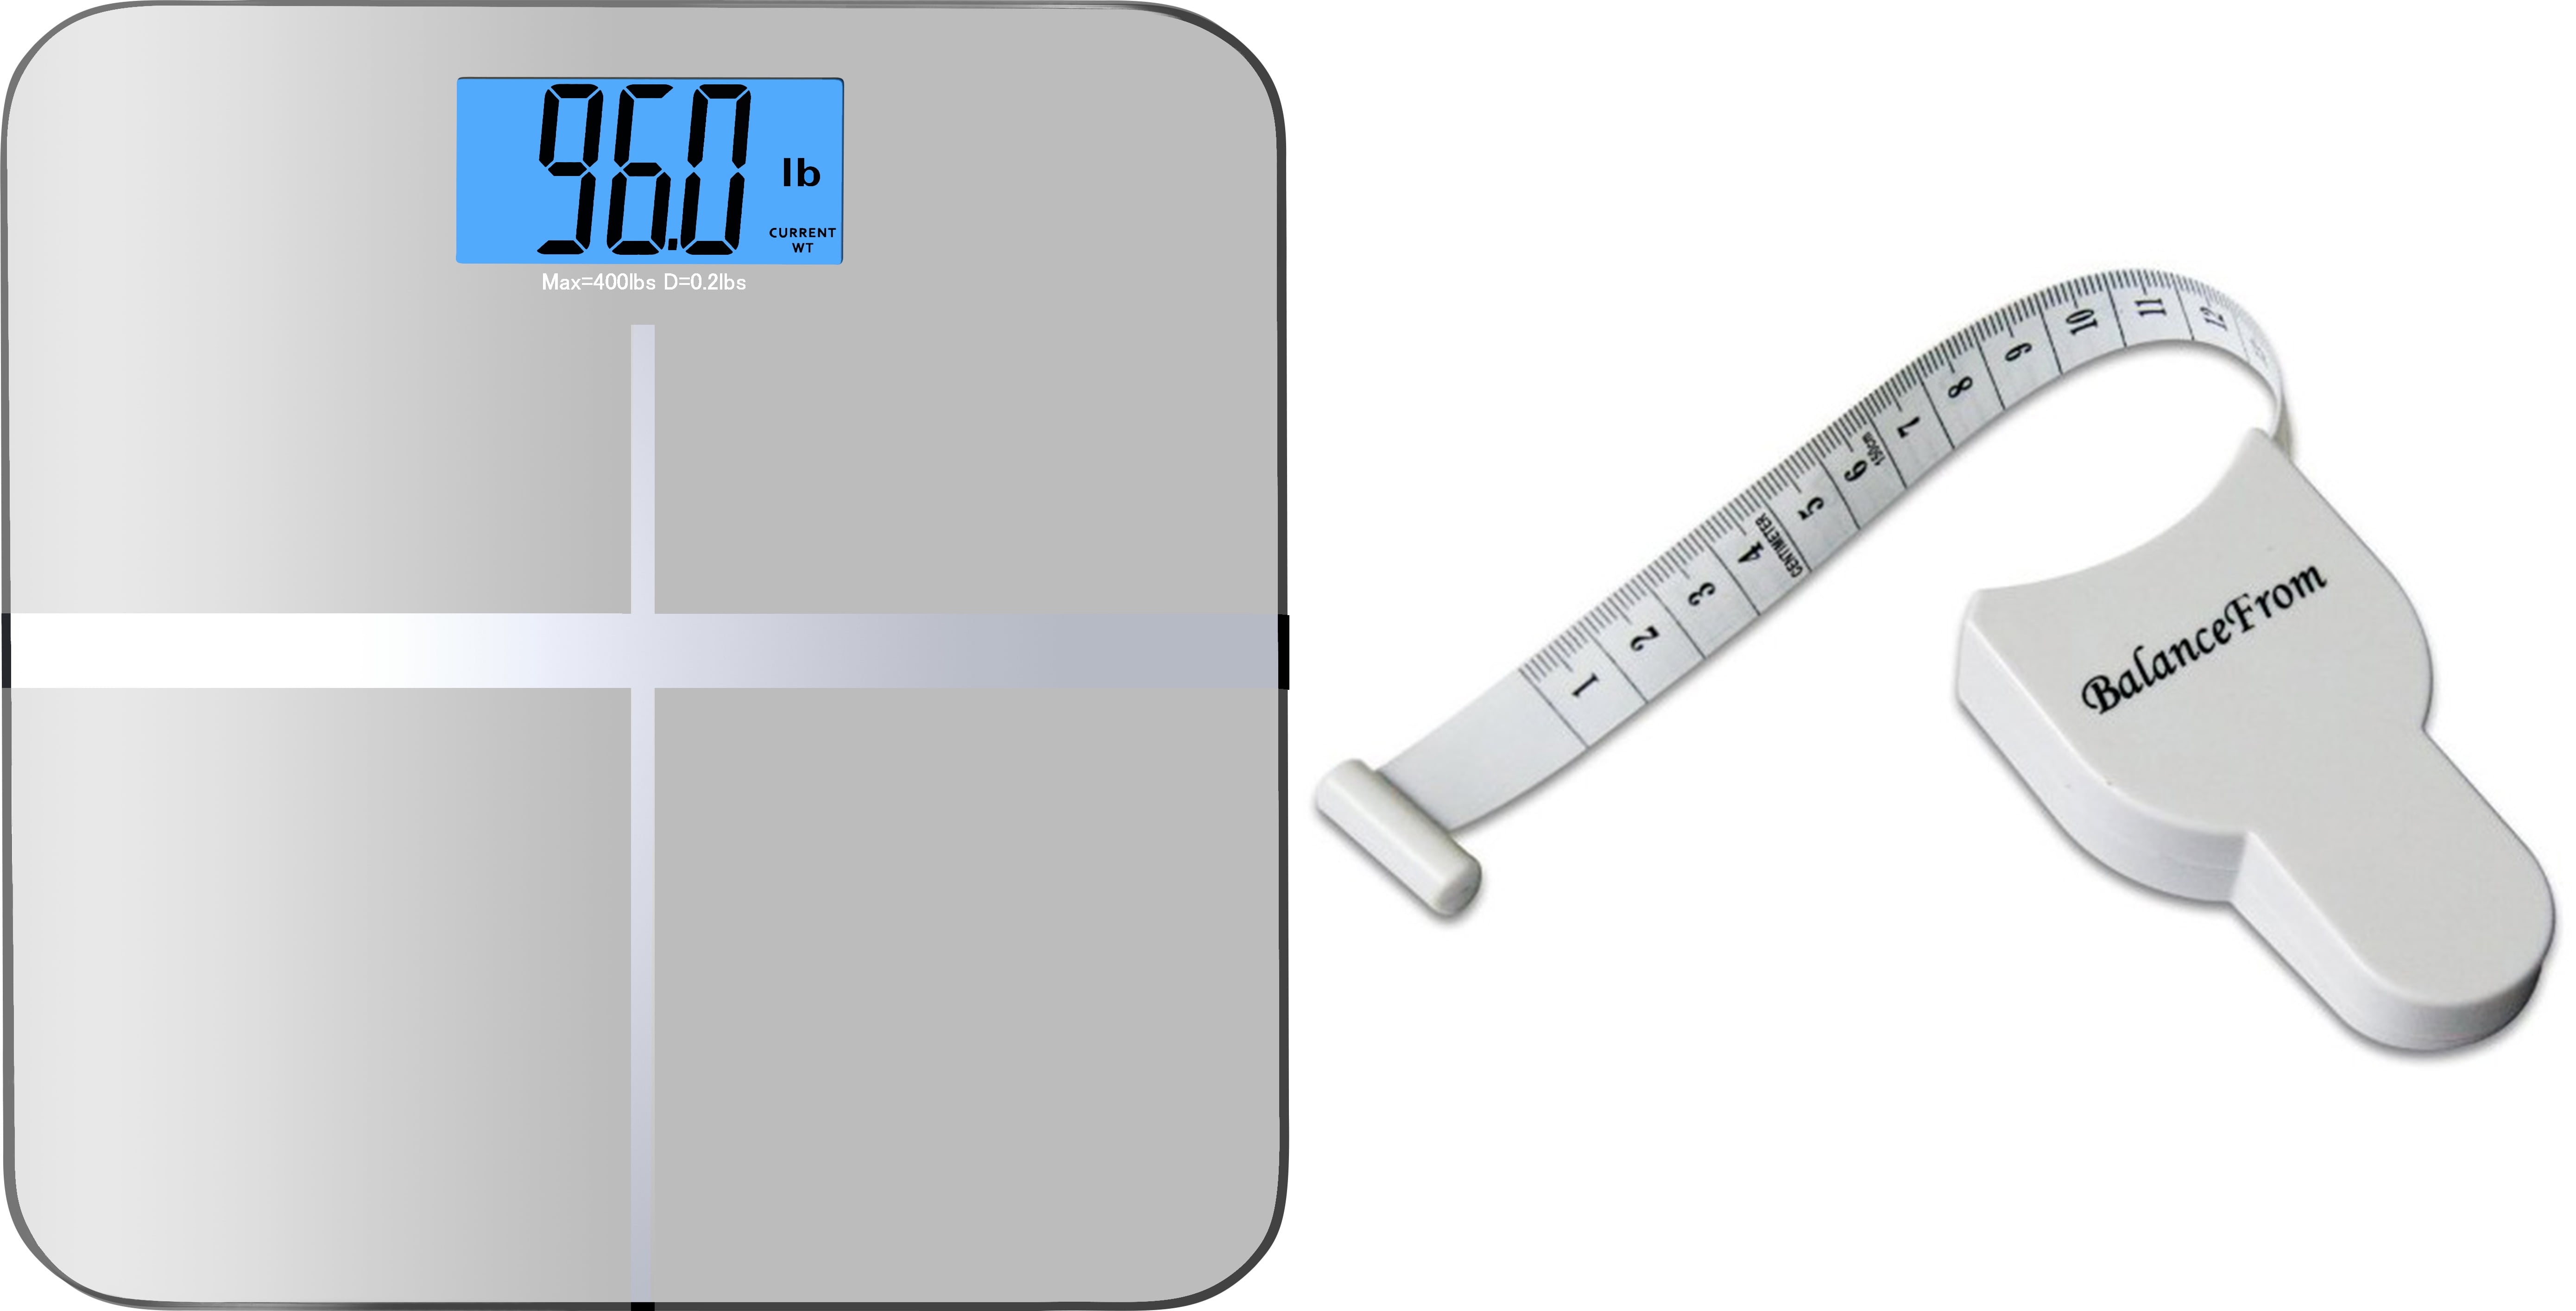 How can bathroom scales give a different weight if I step off, let